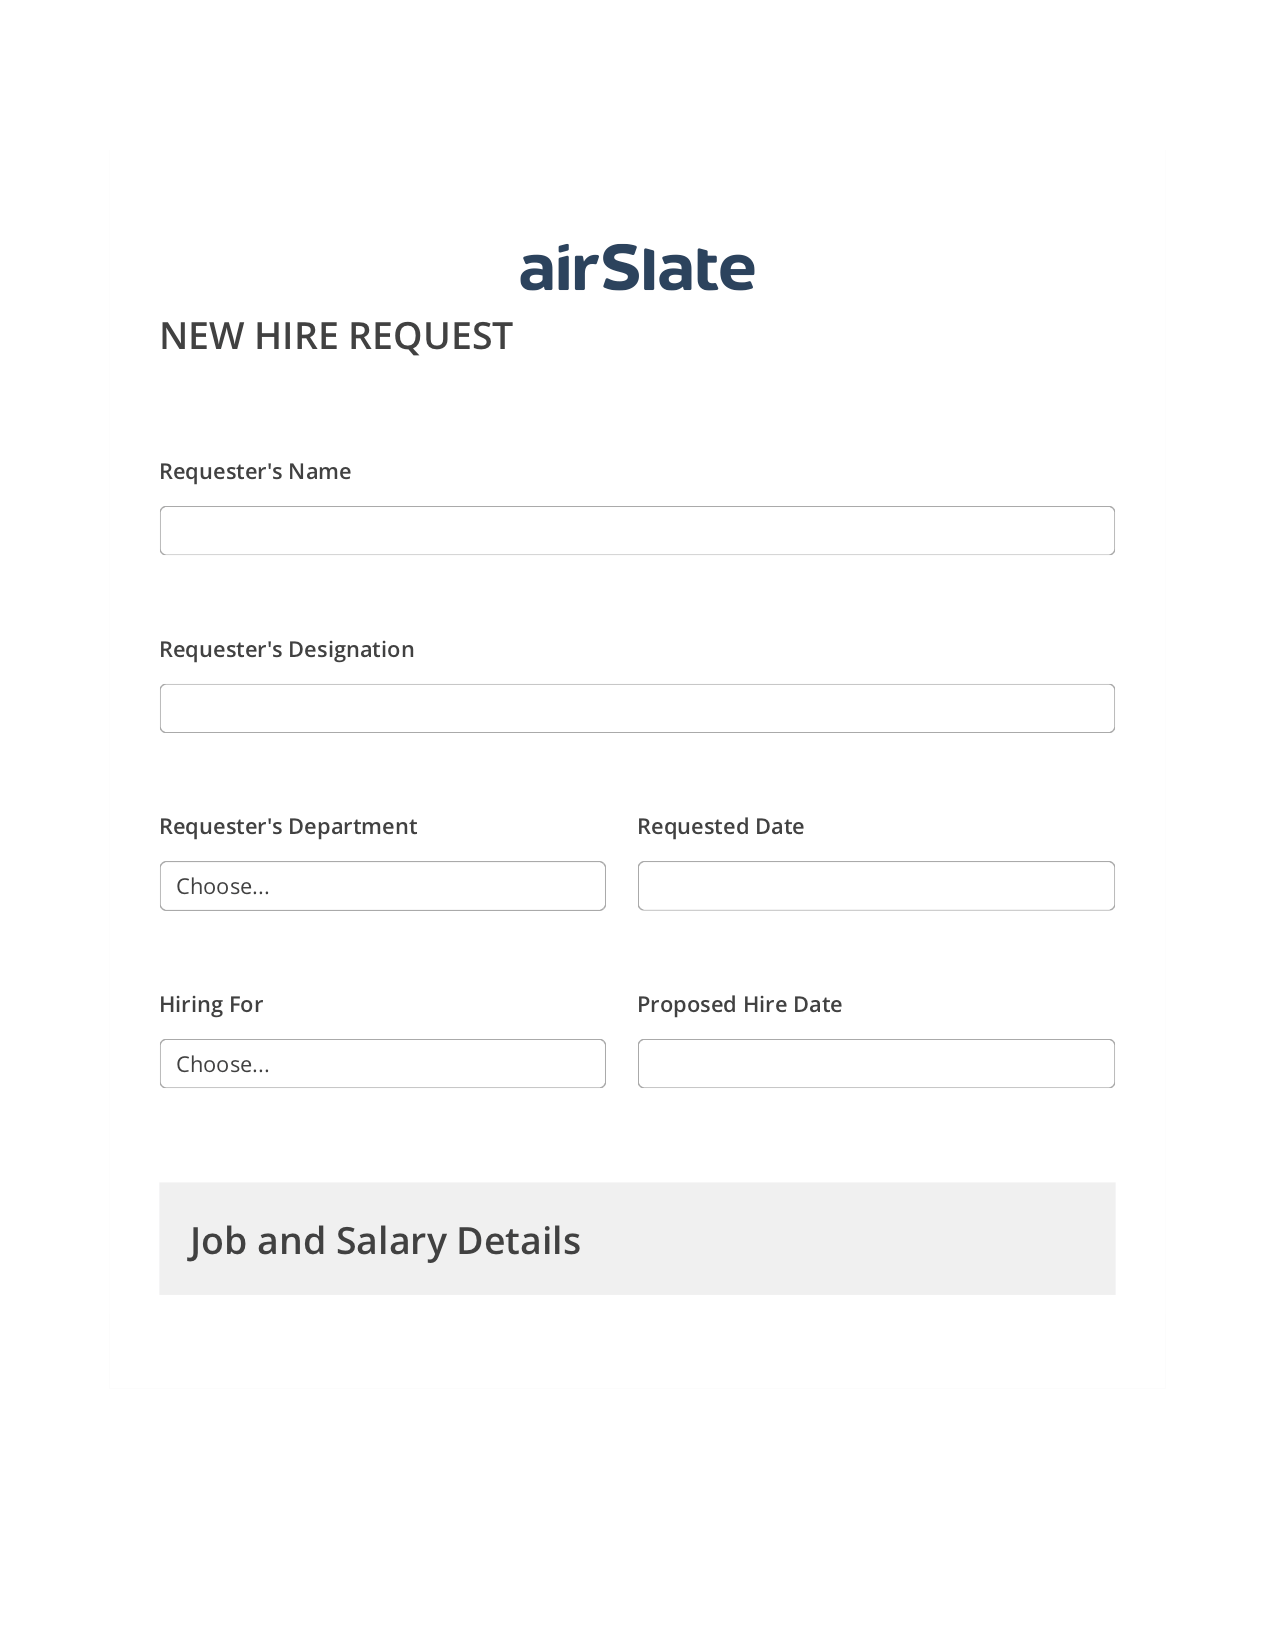 Hiring Request Workflow Pre-fill from Litmos bot, Email Notification Bot, Archive to Box Bot